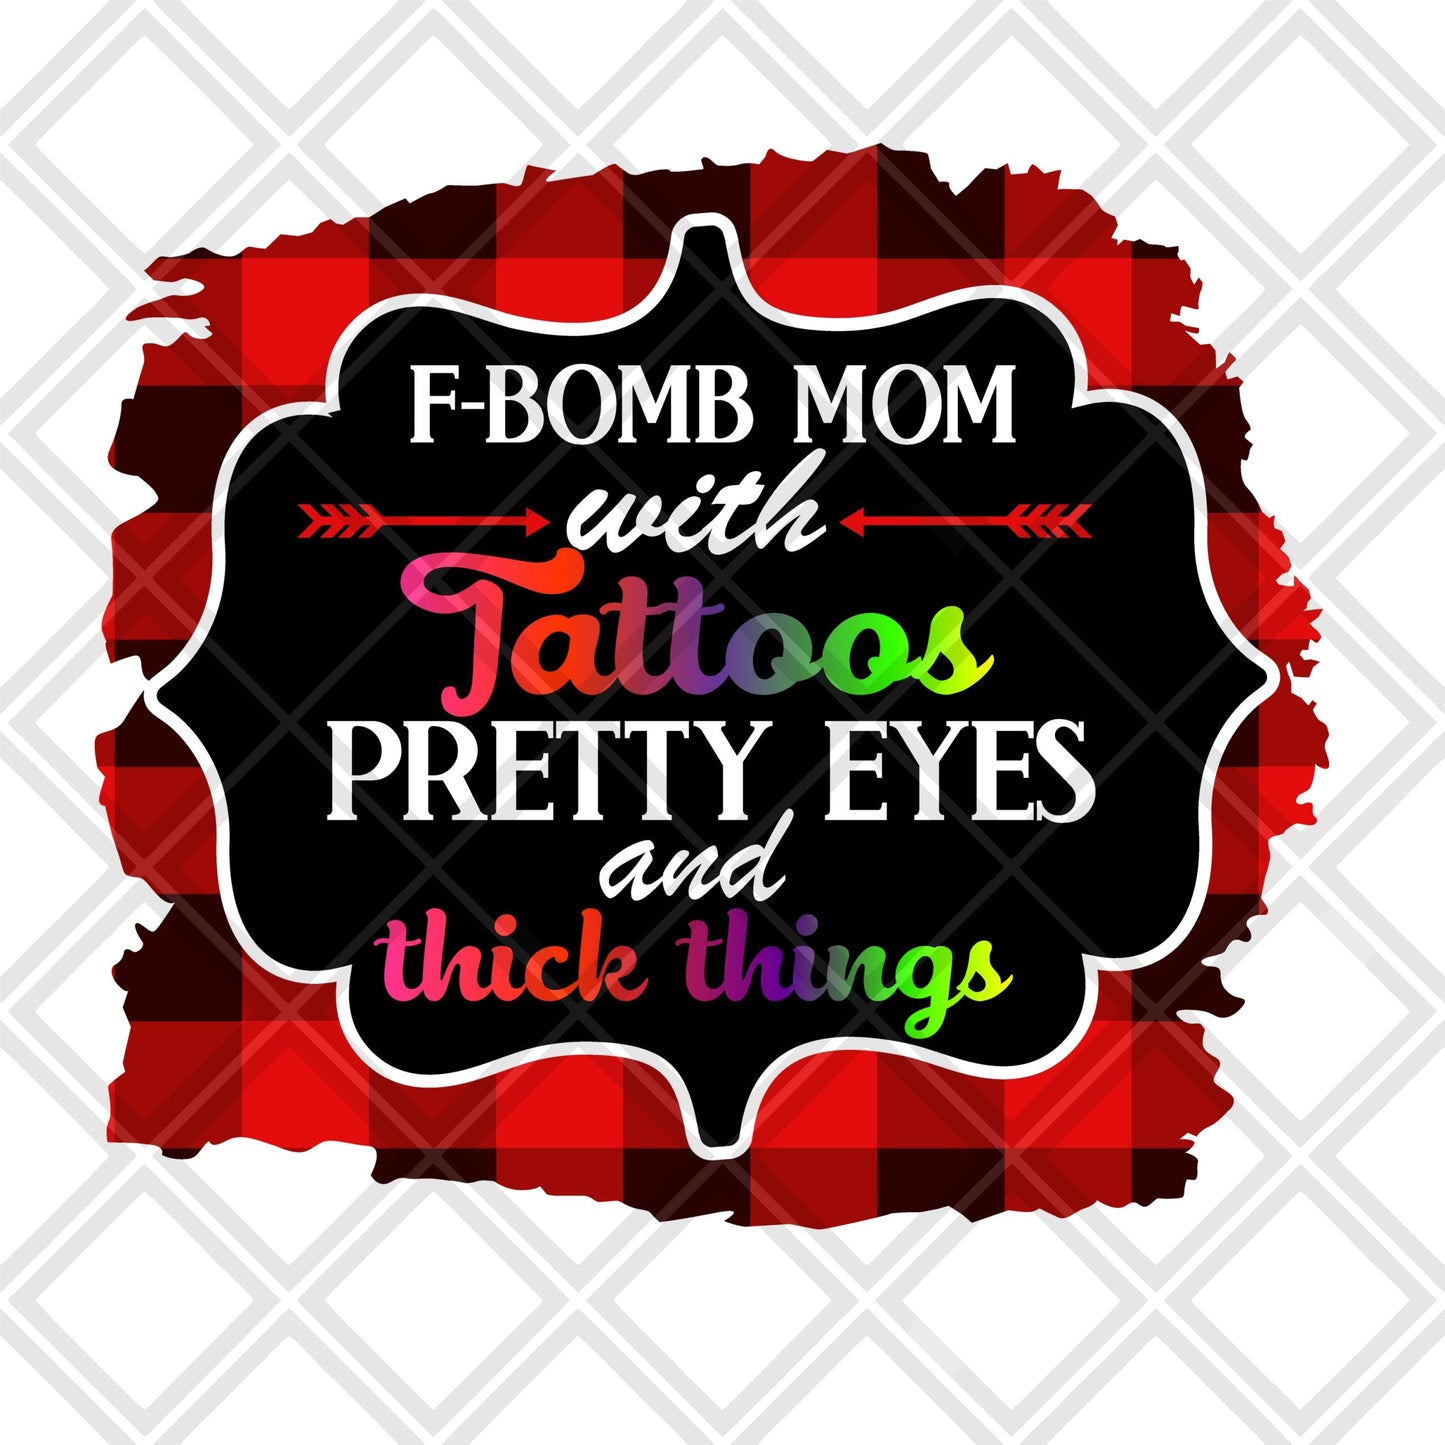 F bomb mom with Tattoos pretty eyes and thick things png Digital Download Instand Download